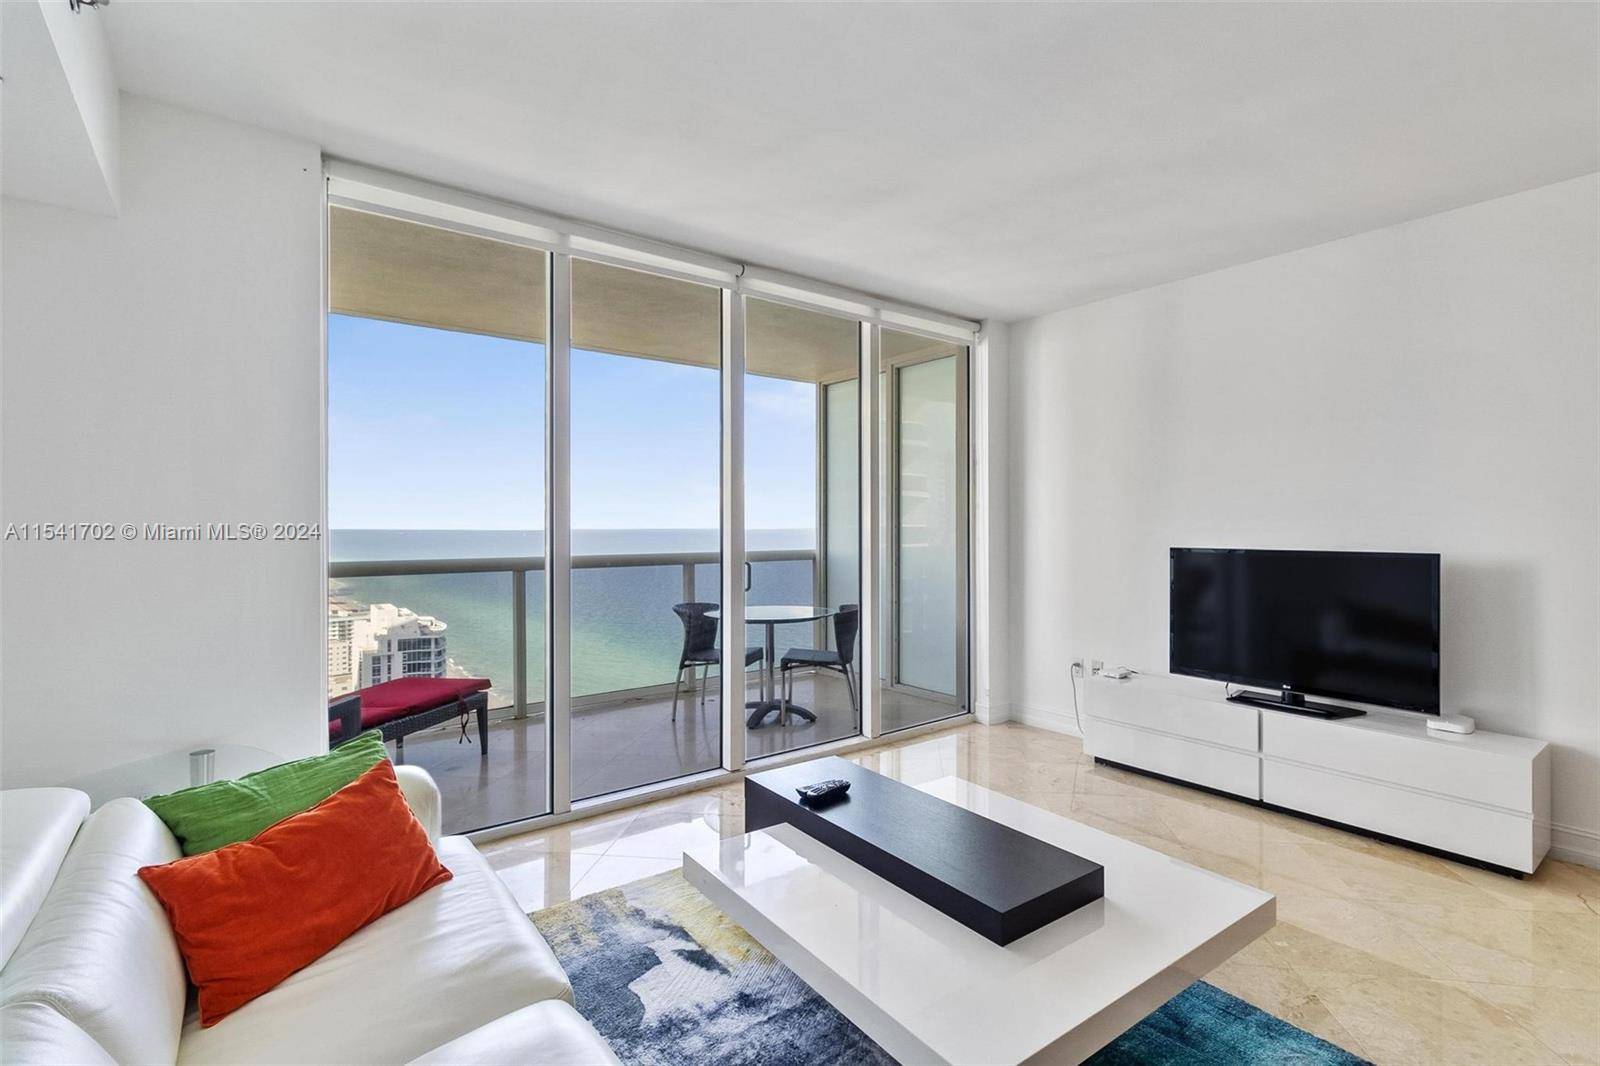 Experience the epitome of luxury in this exquisite studio den unit, 1 bathroom, a captivating NE exposure and breathtaking ocean views.